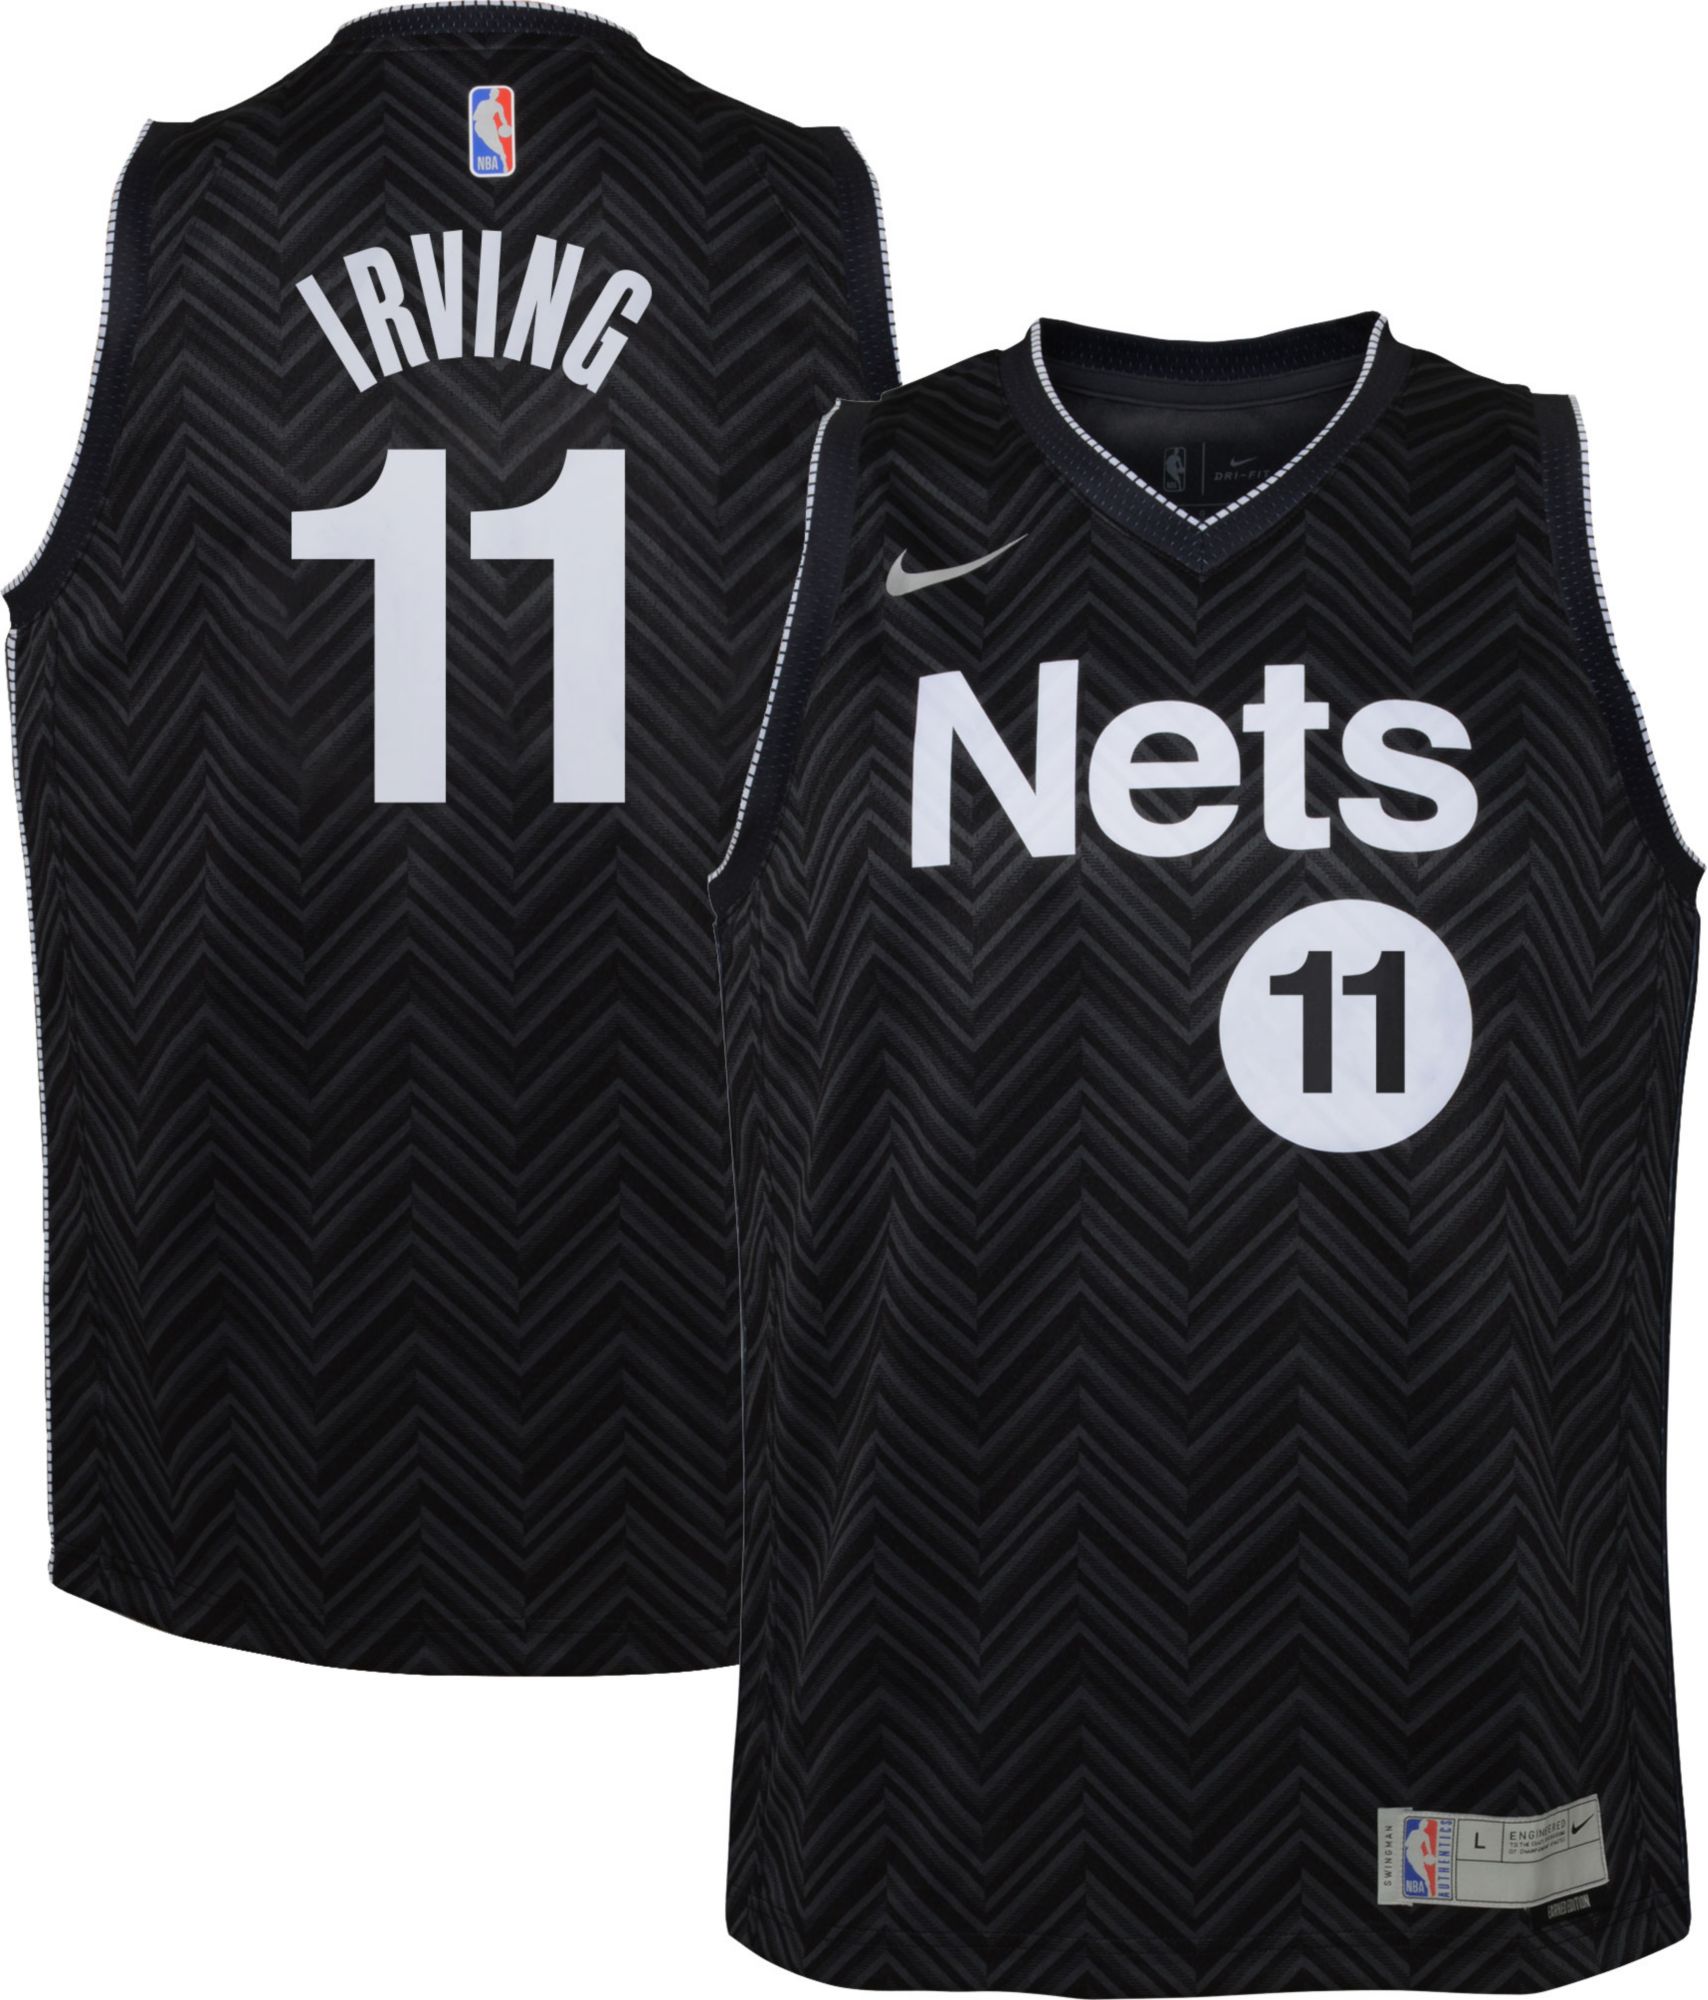 kyrie clothes youth